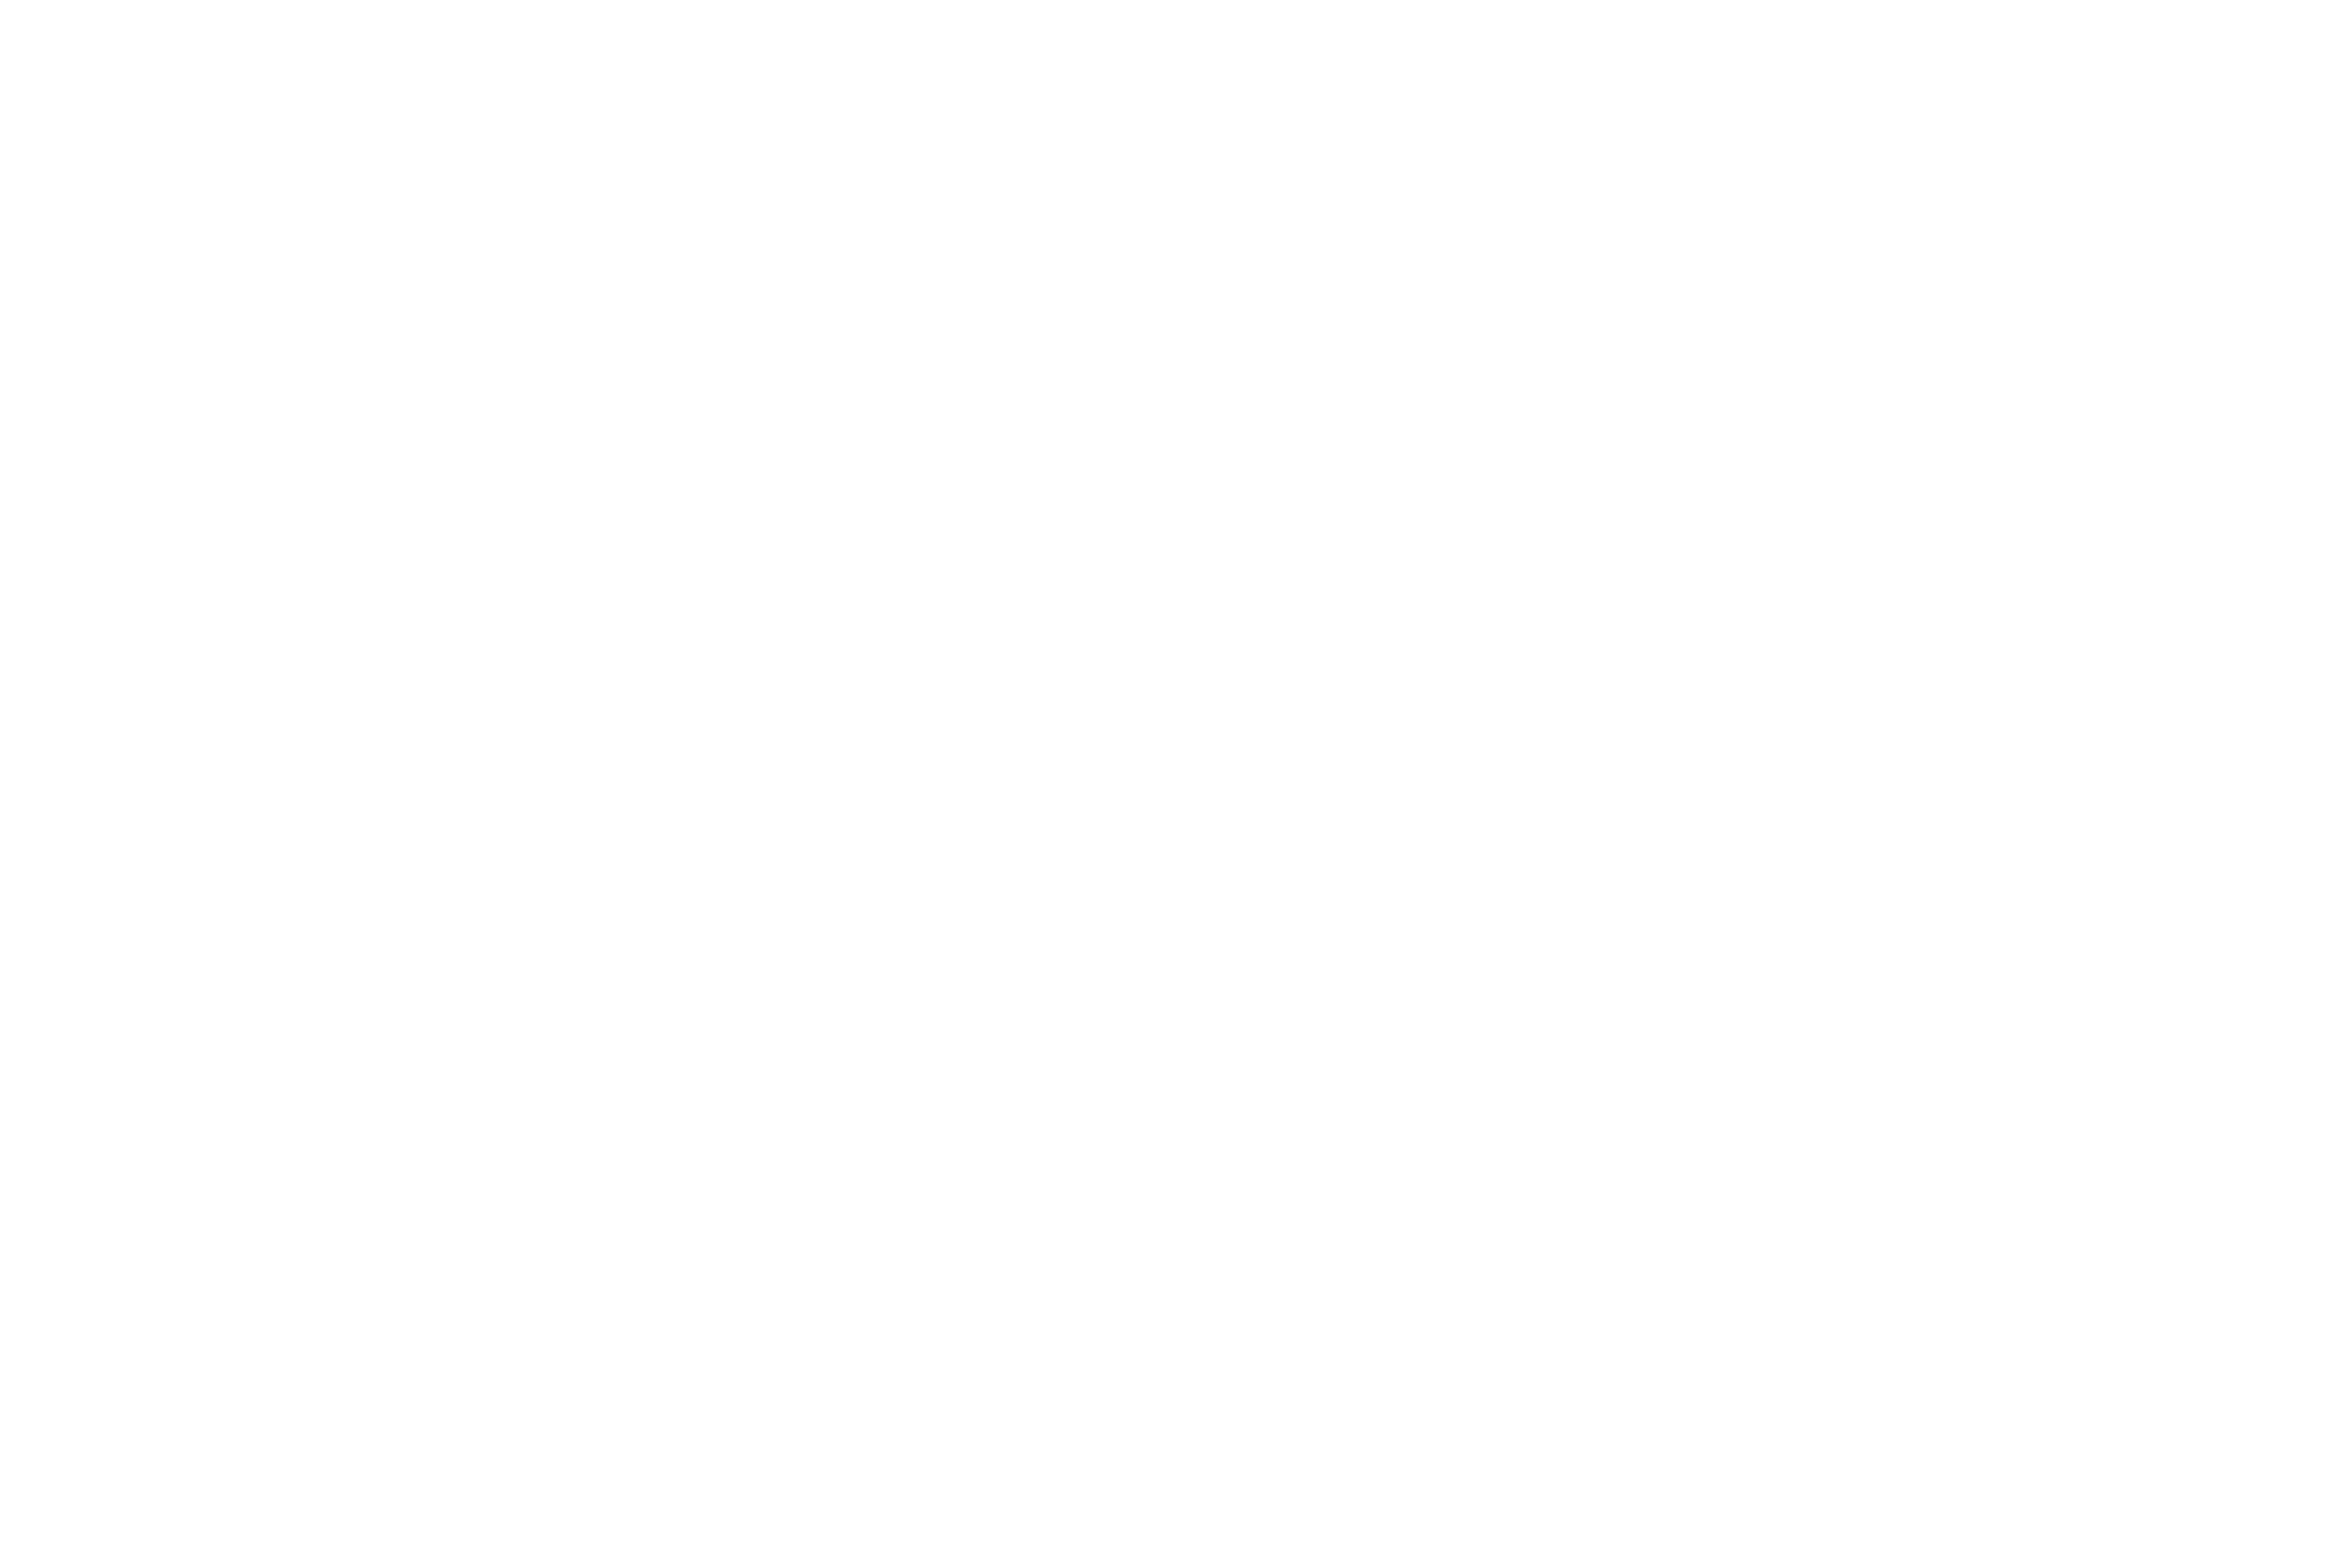 Join the Barracuda Championship